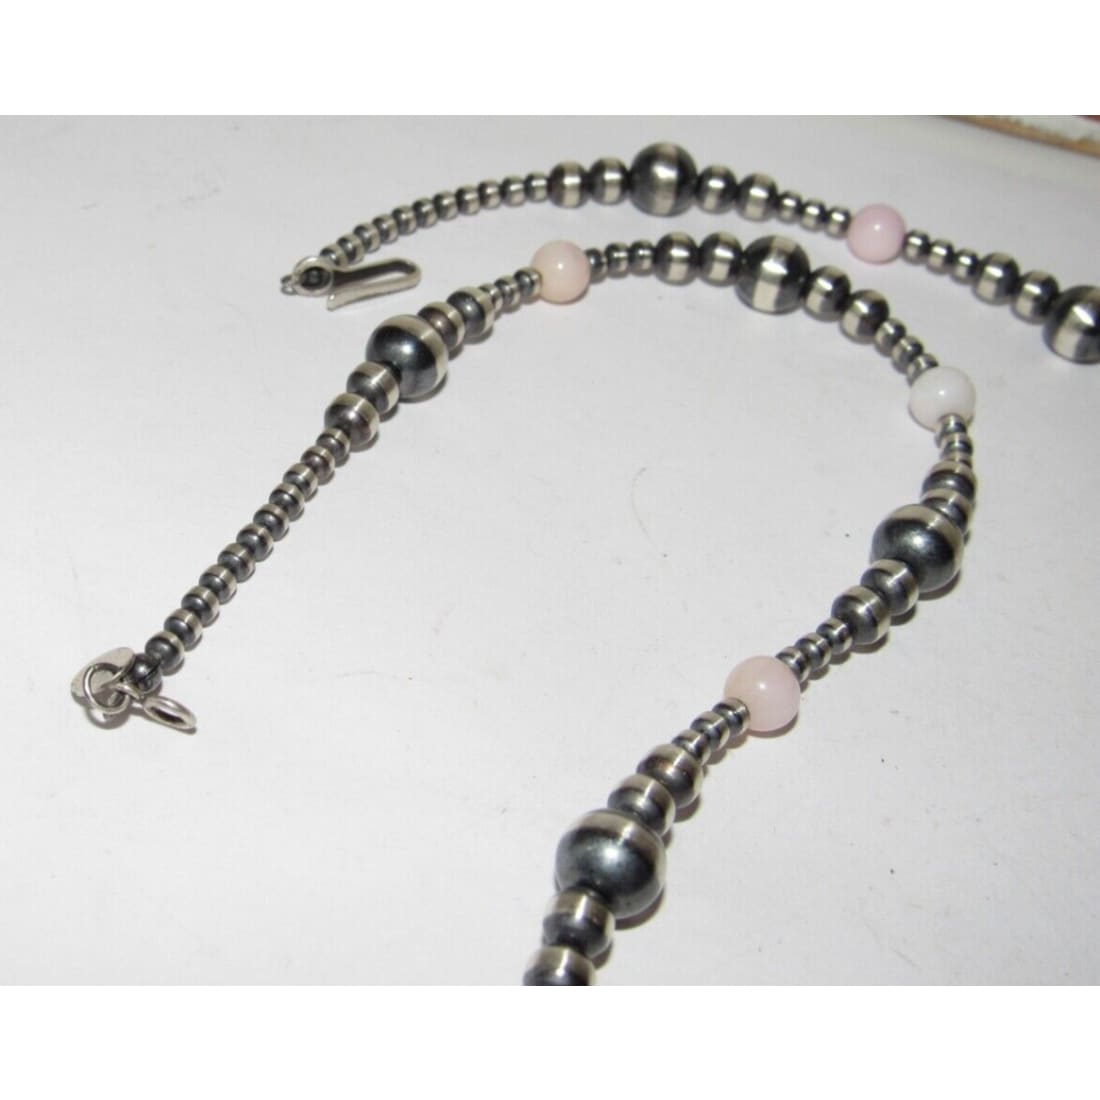 Navajo Pearls Necklace Sterling Silver Pink Conch Shell 20